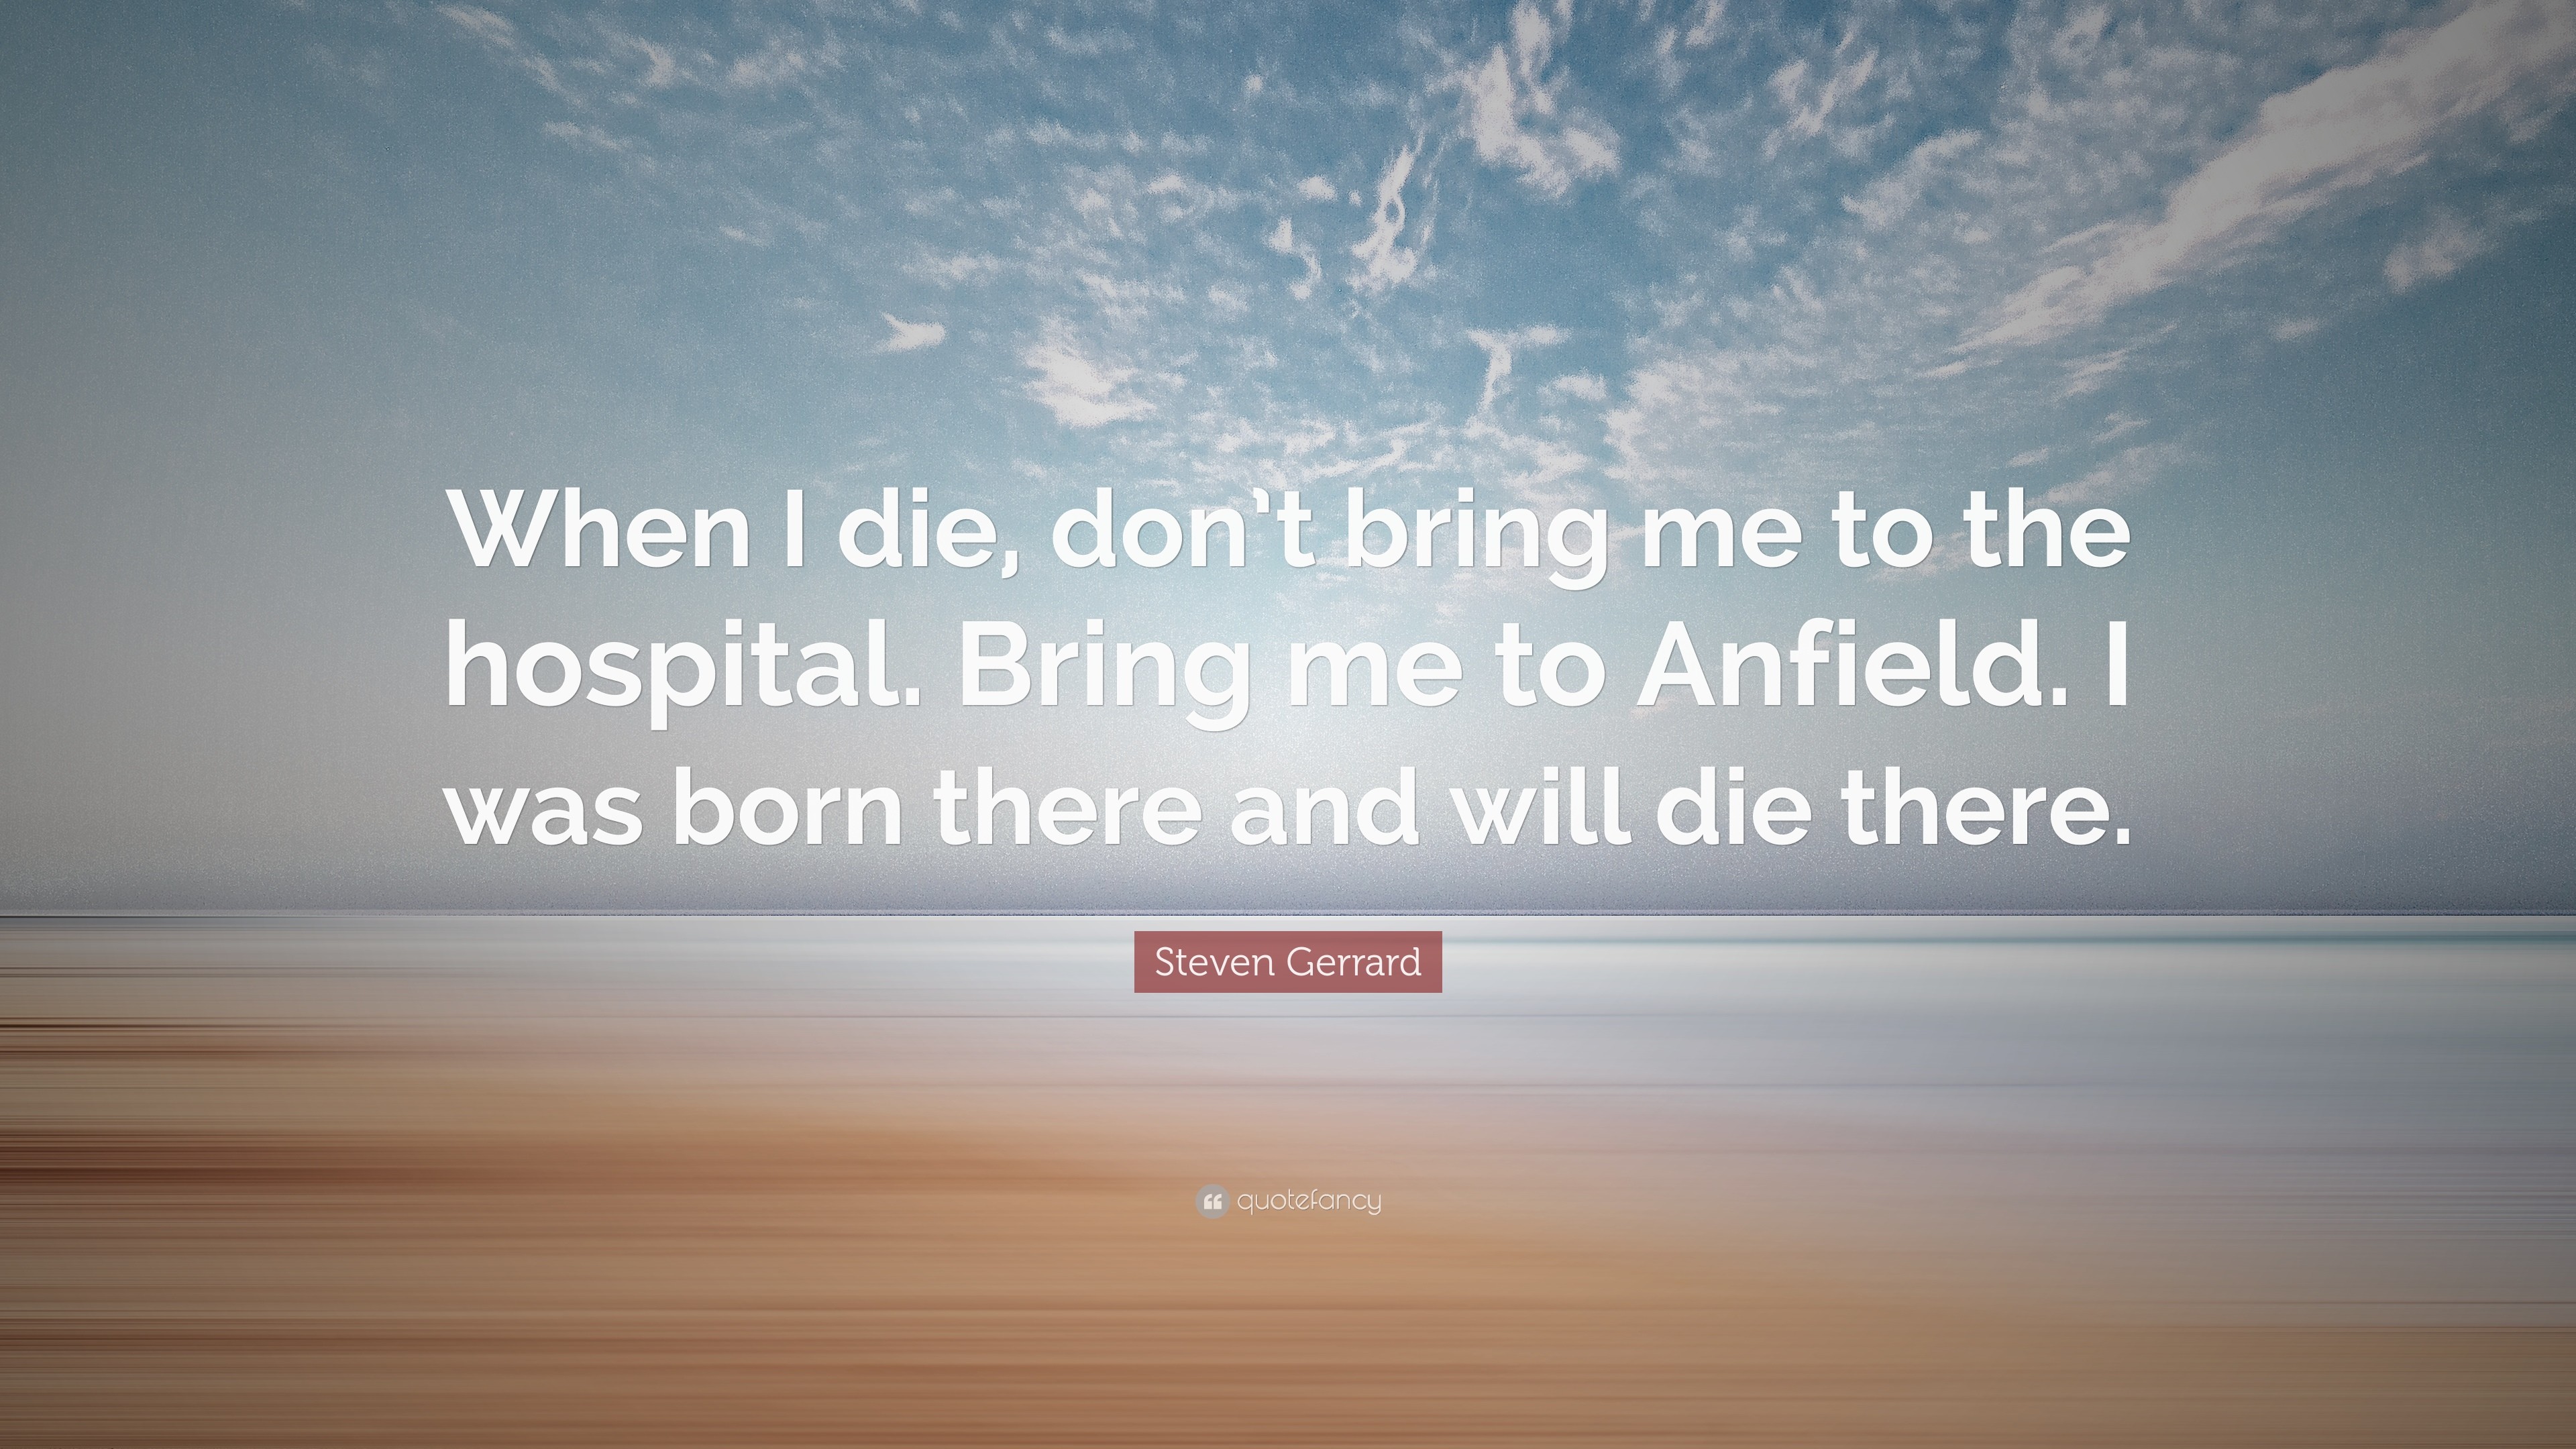 3840x2160 Steven Gerrard Quote: “When I die, don't bring me to the